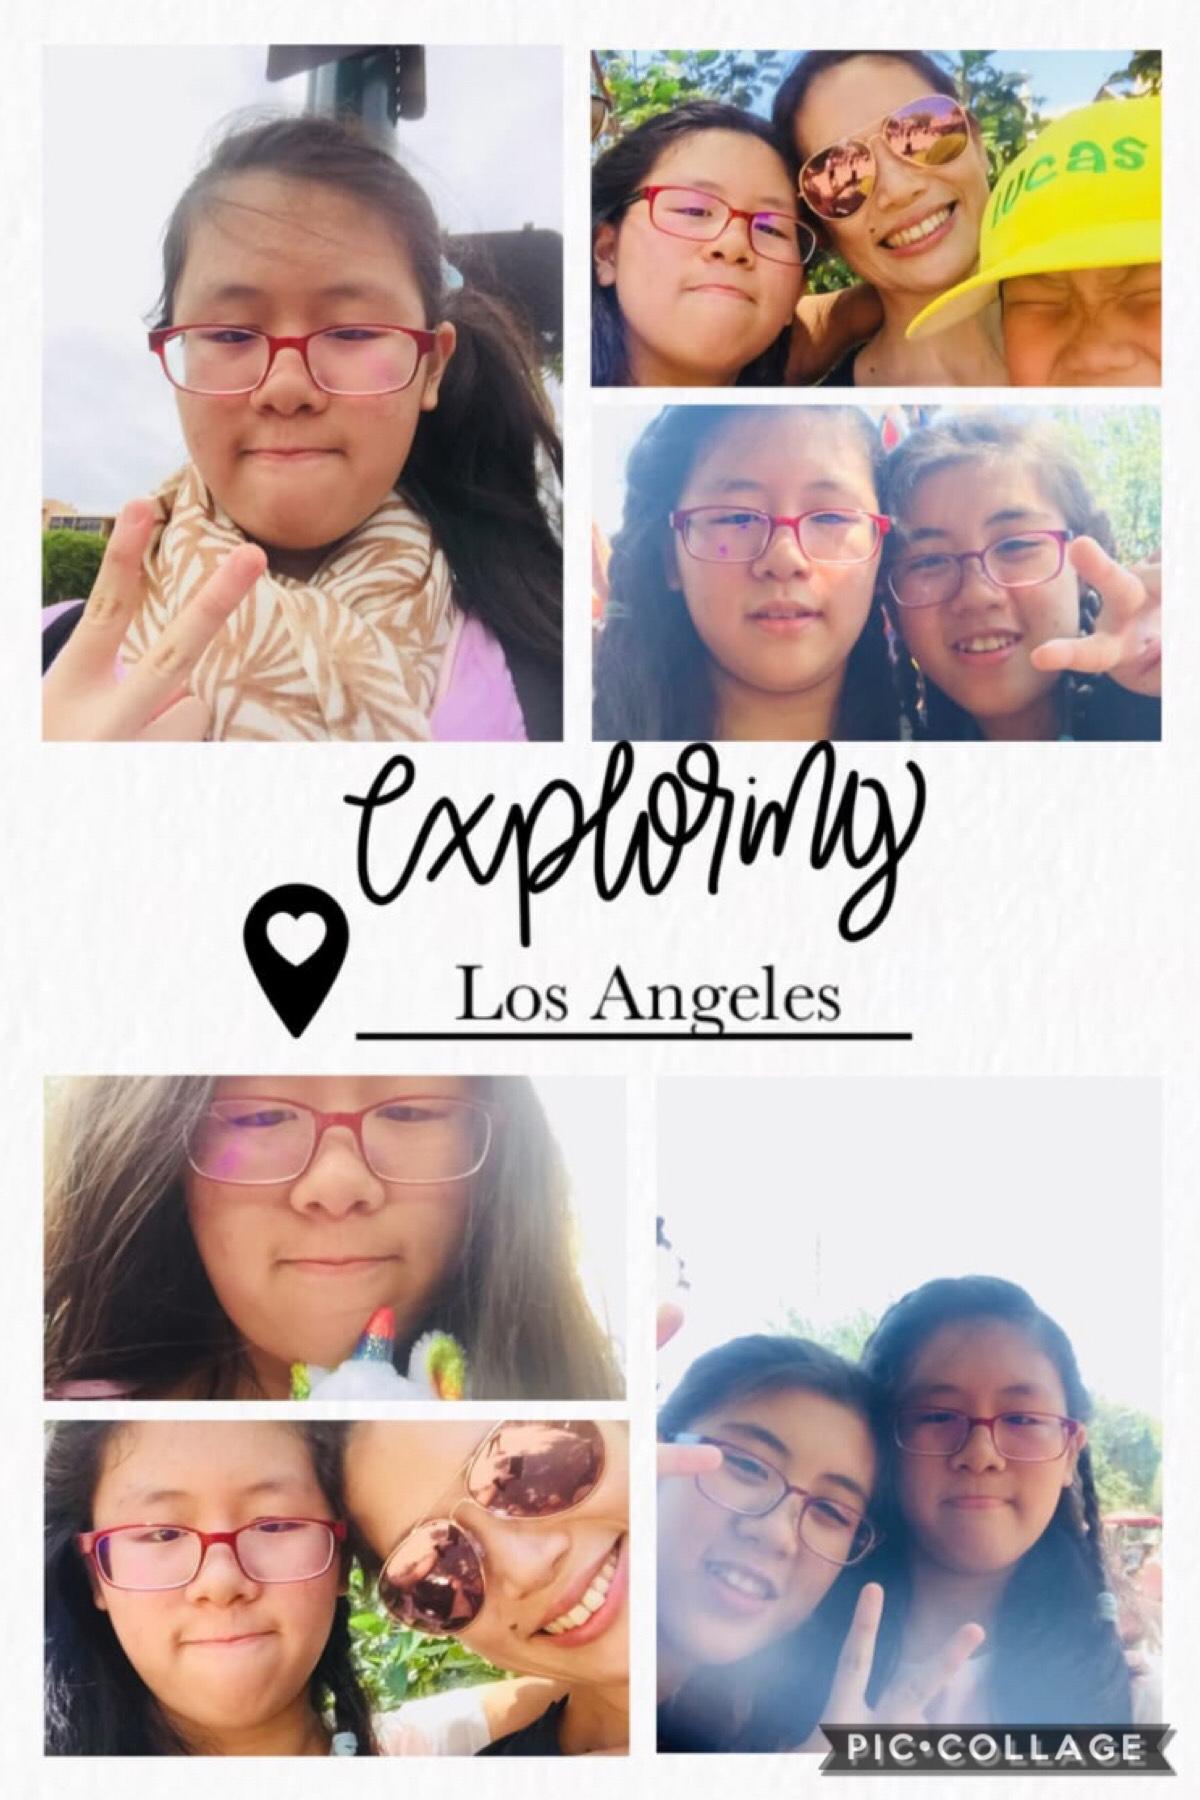 I went to Los Angeles last year and this was on my other acc @Crysteeleong make sure to follow lol